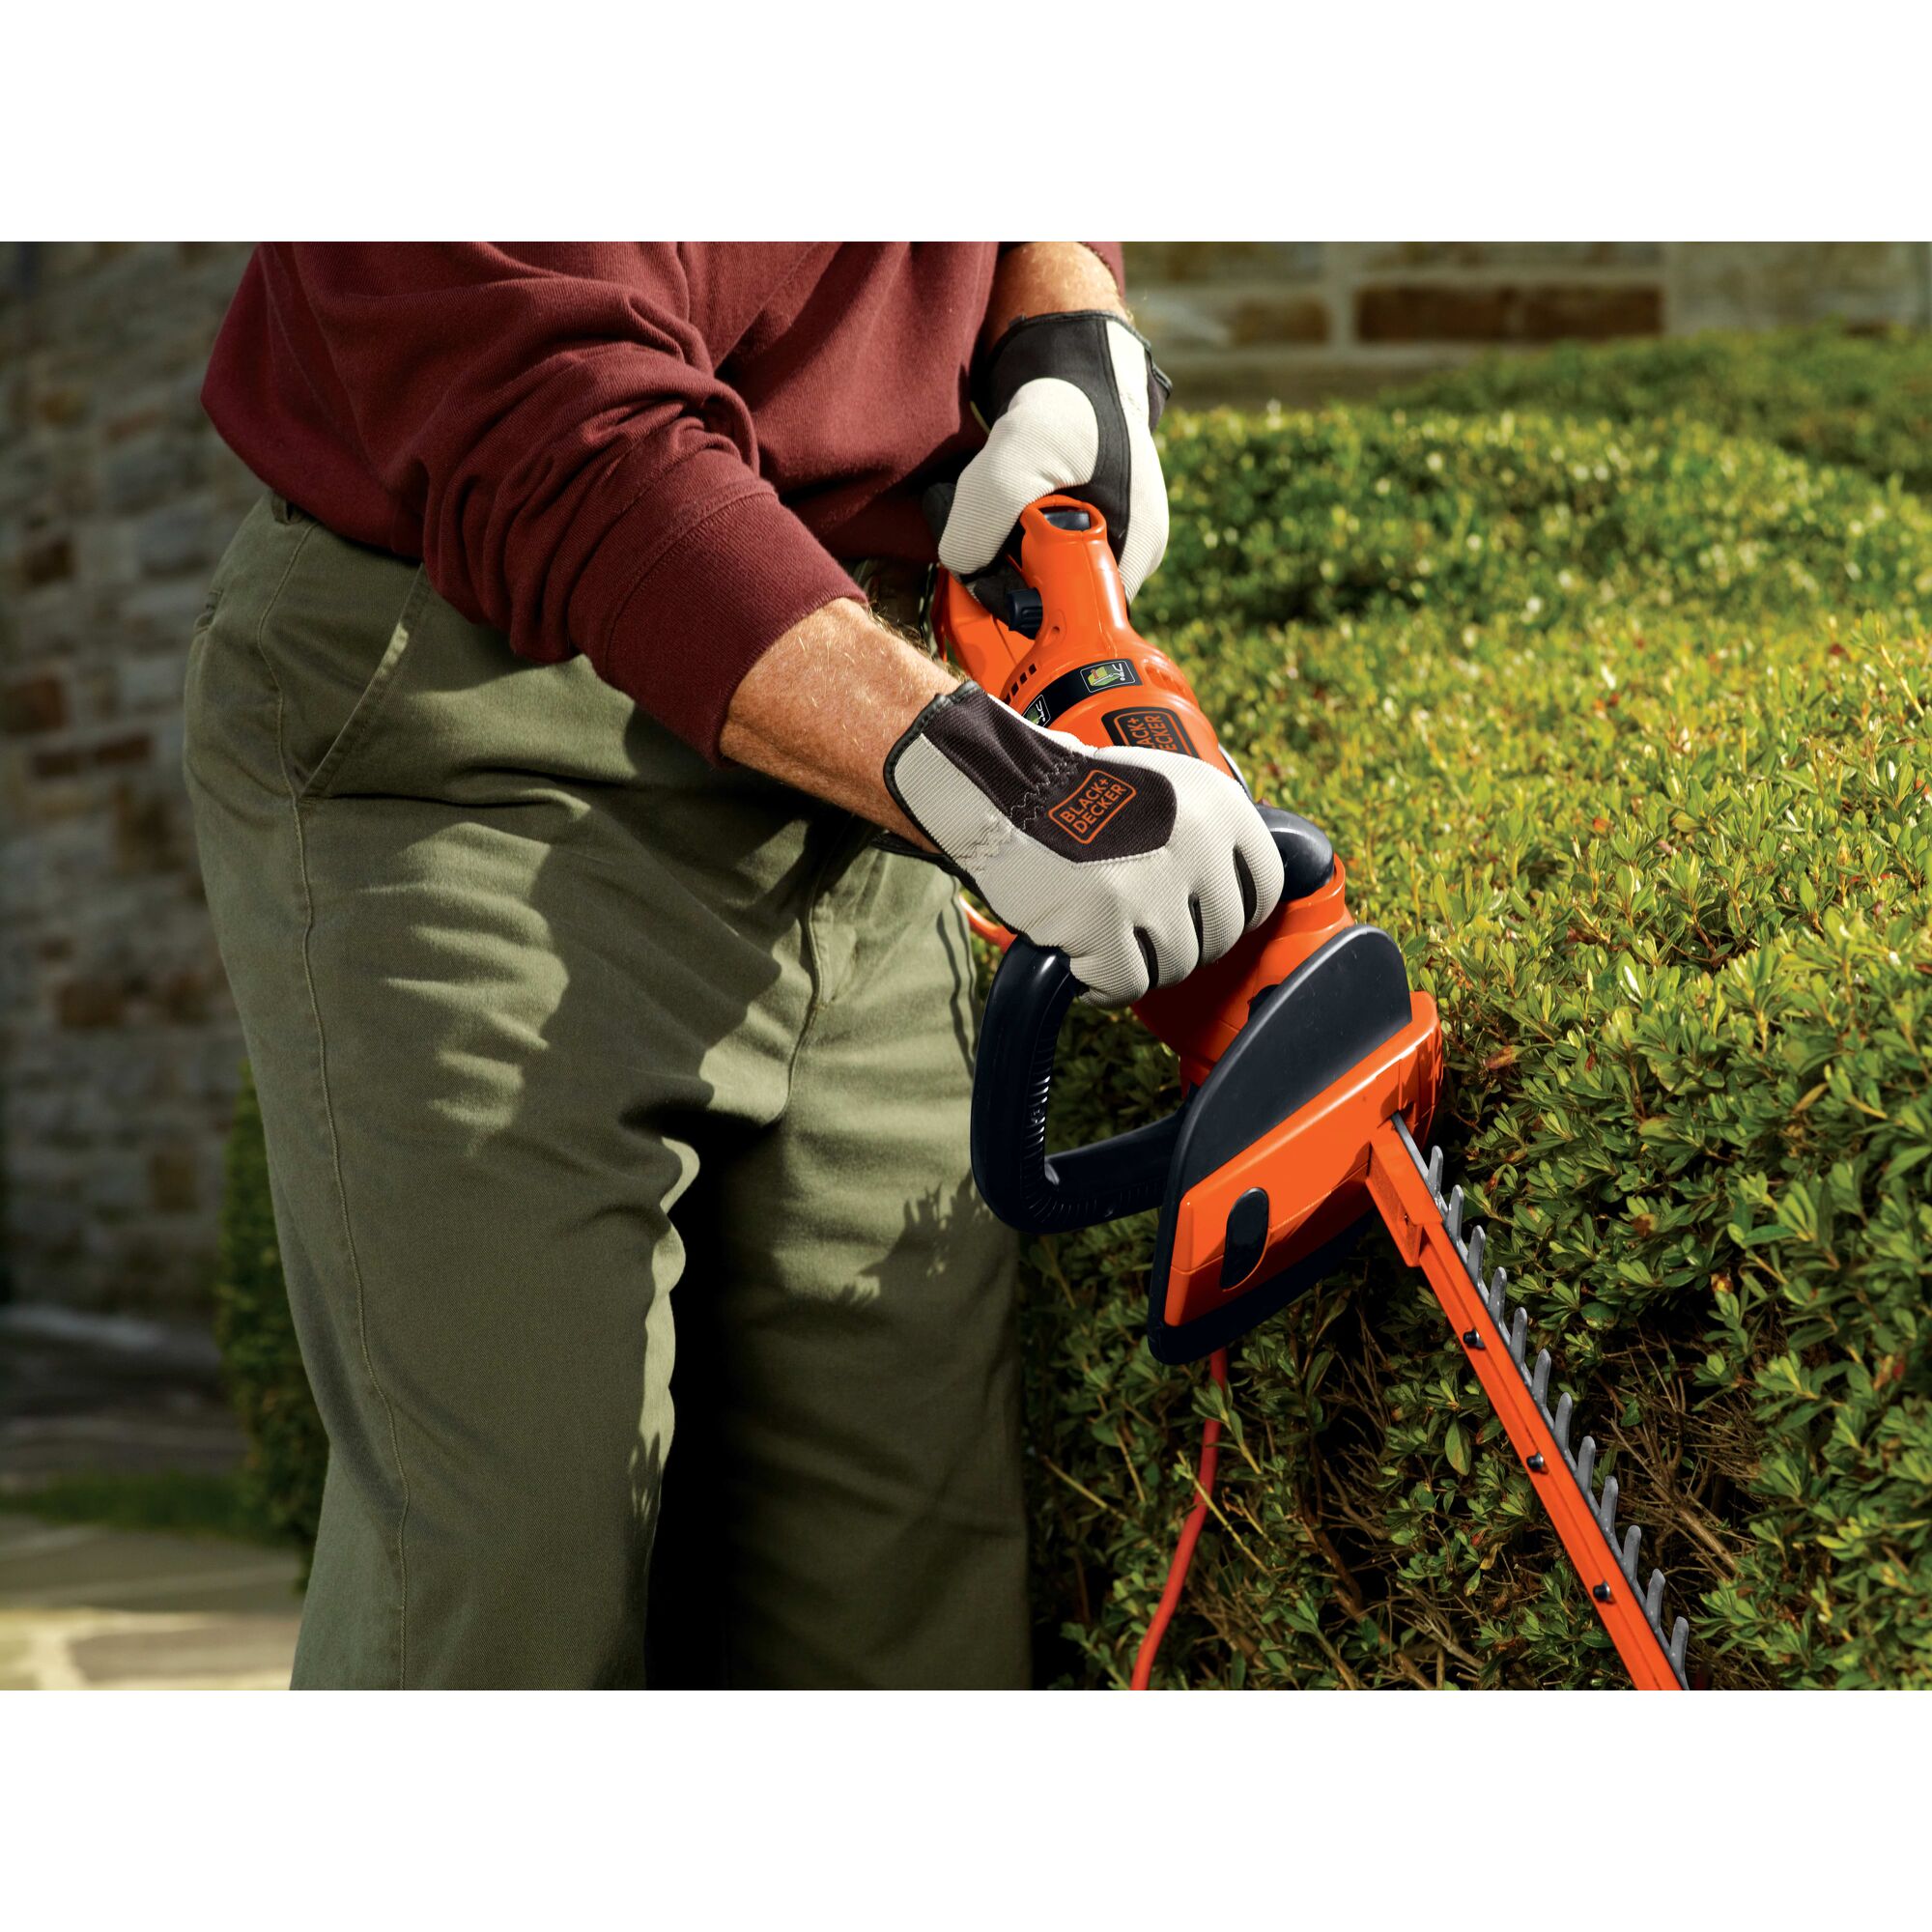 24 inch hedge trimmer with rotating handle being used.